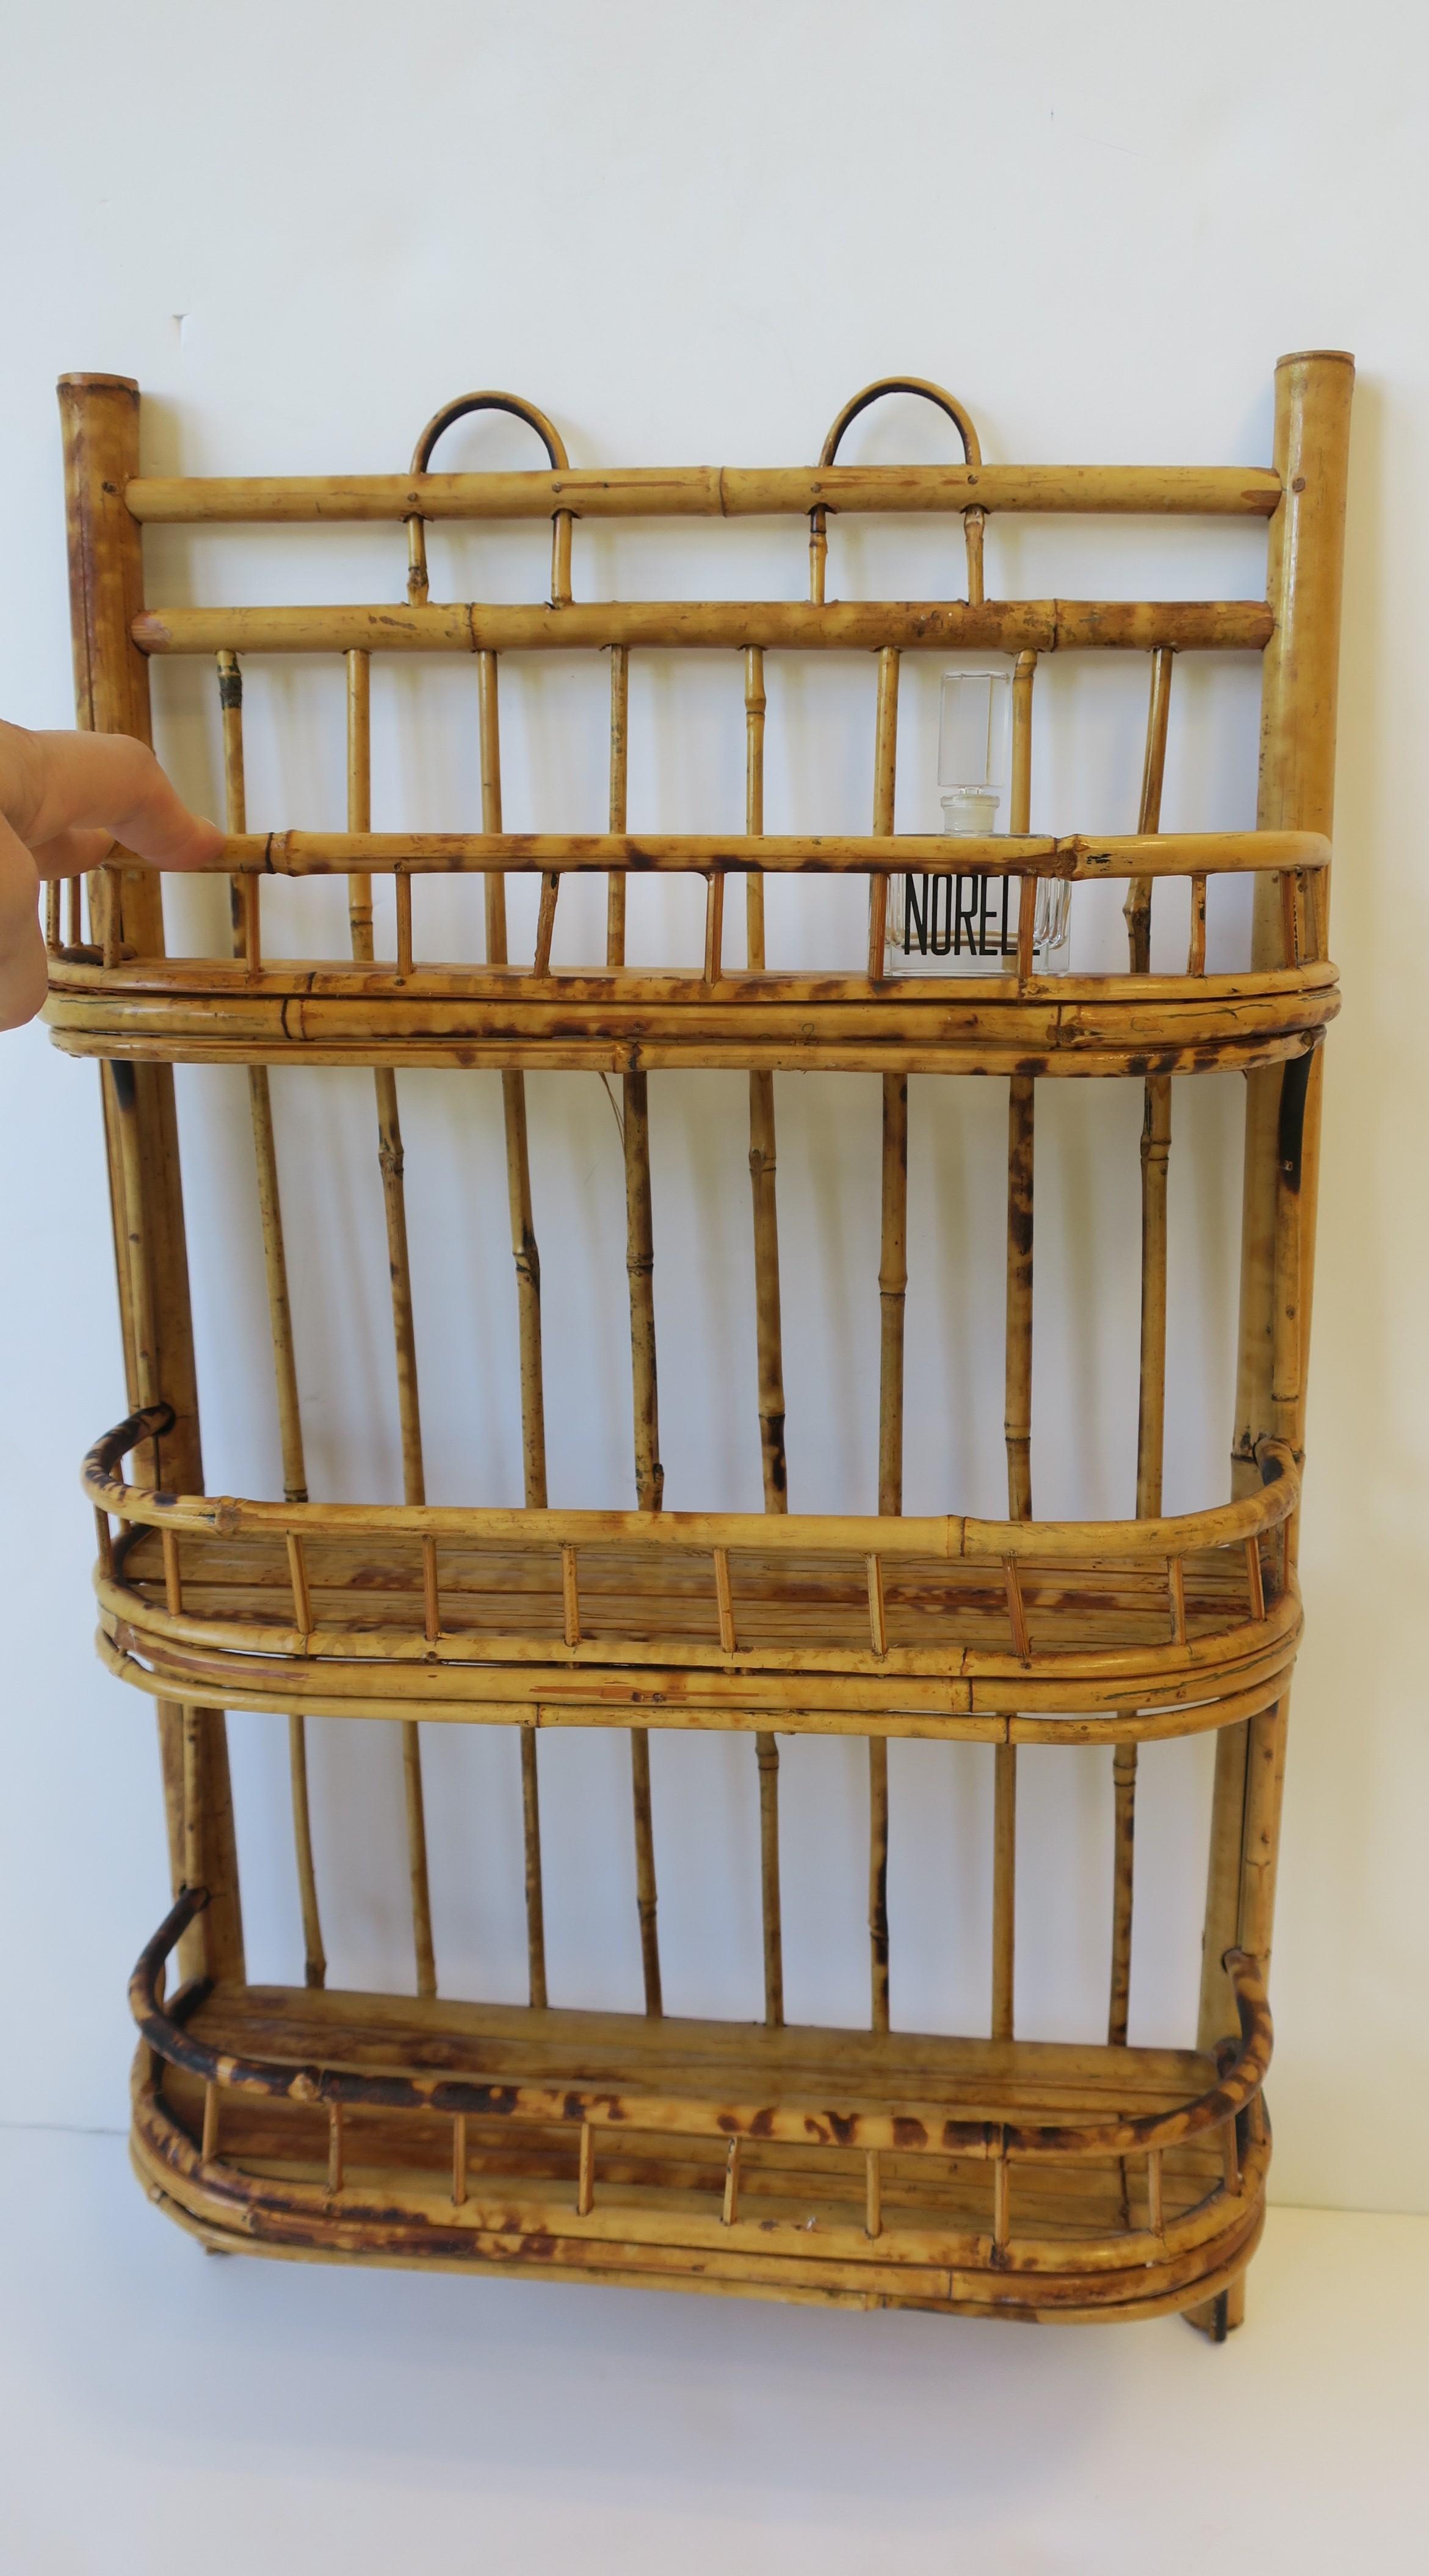 A vintage bamboo wicker wall shelf with three shelves great for holding kitchen or bathroom items, circa late 20th century. A great shelf for spices or perfume. Plenty of ample space; please see measurements below. This wall shelf has three shelves